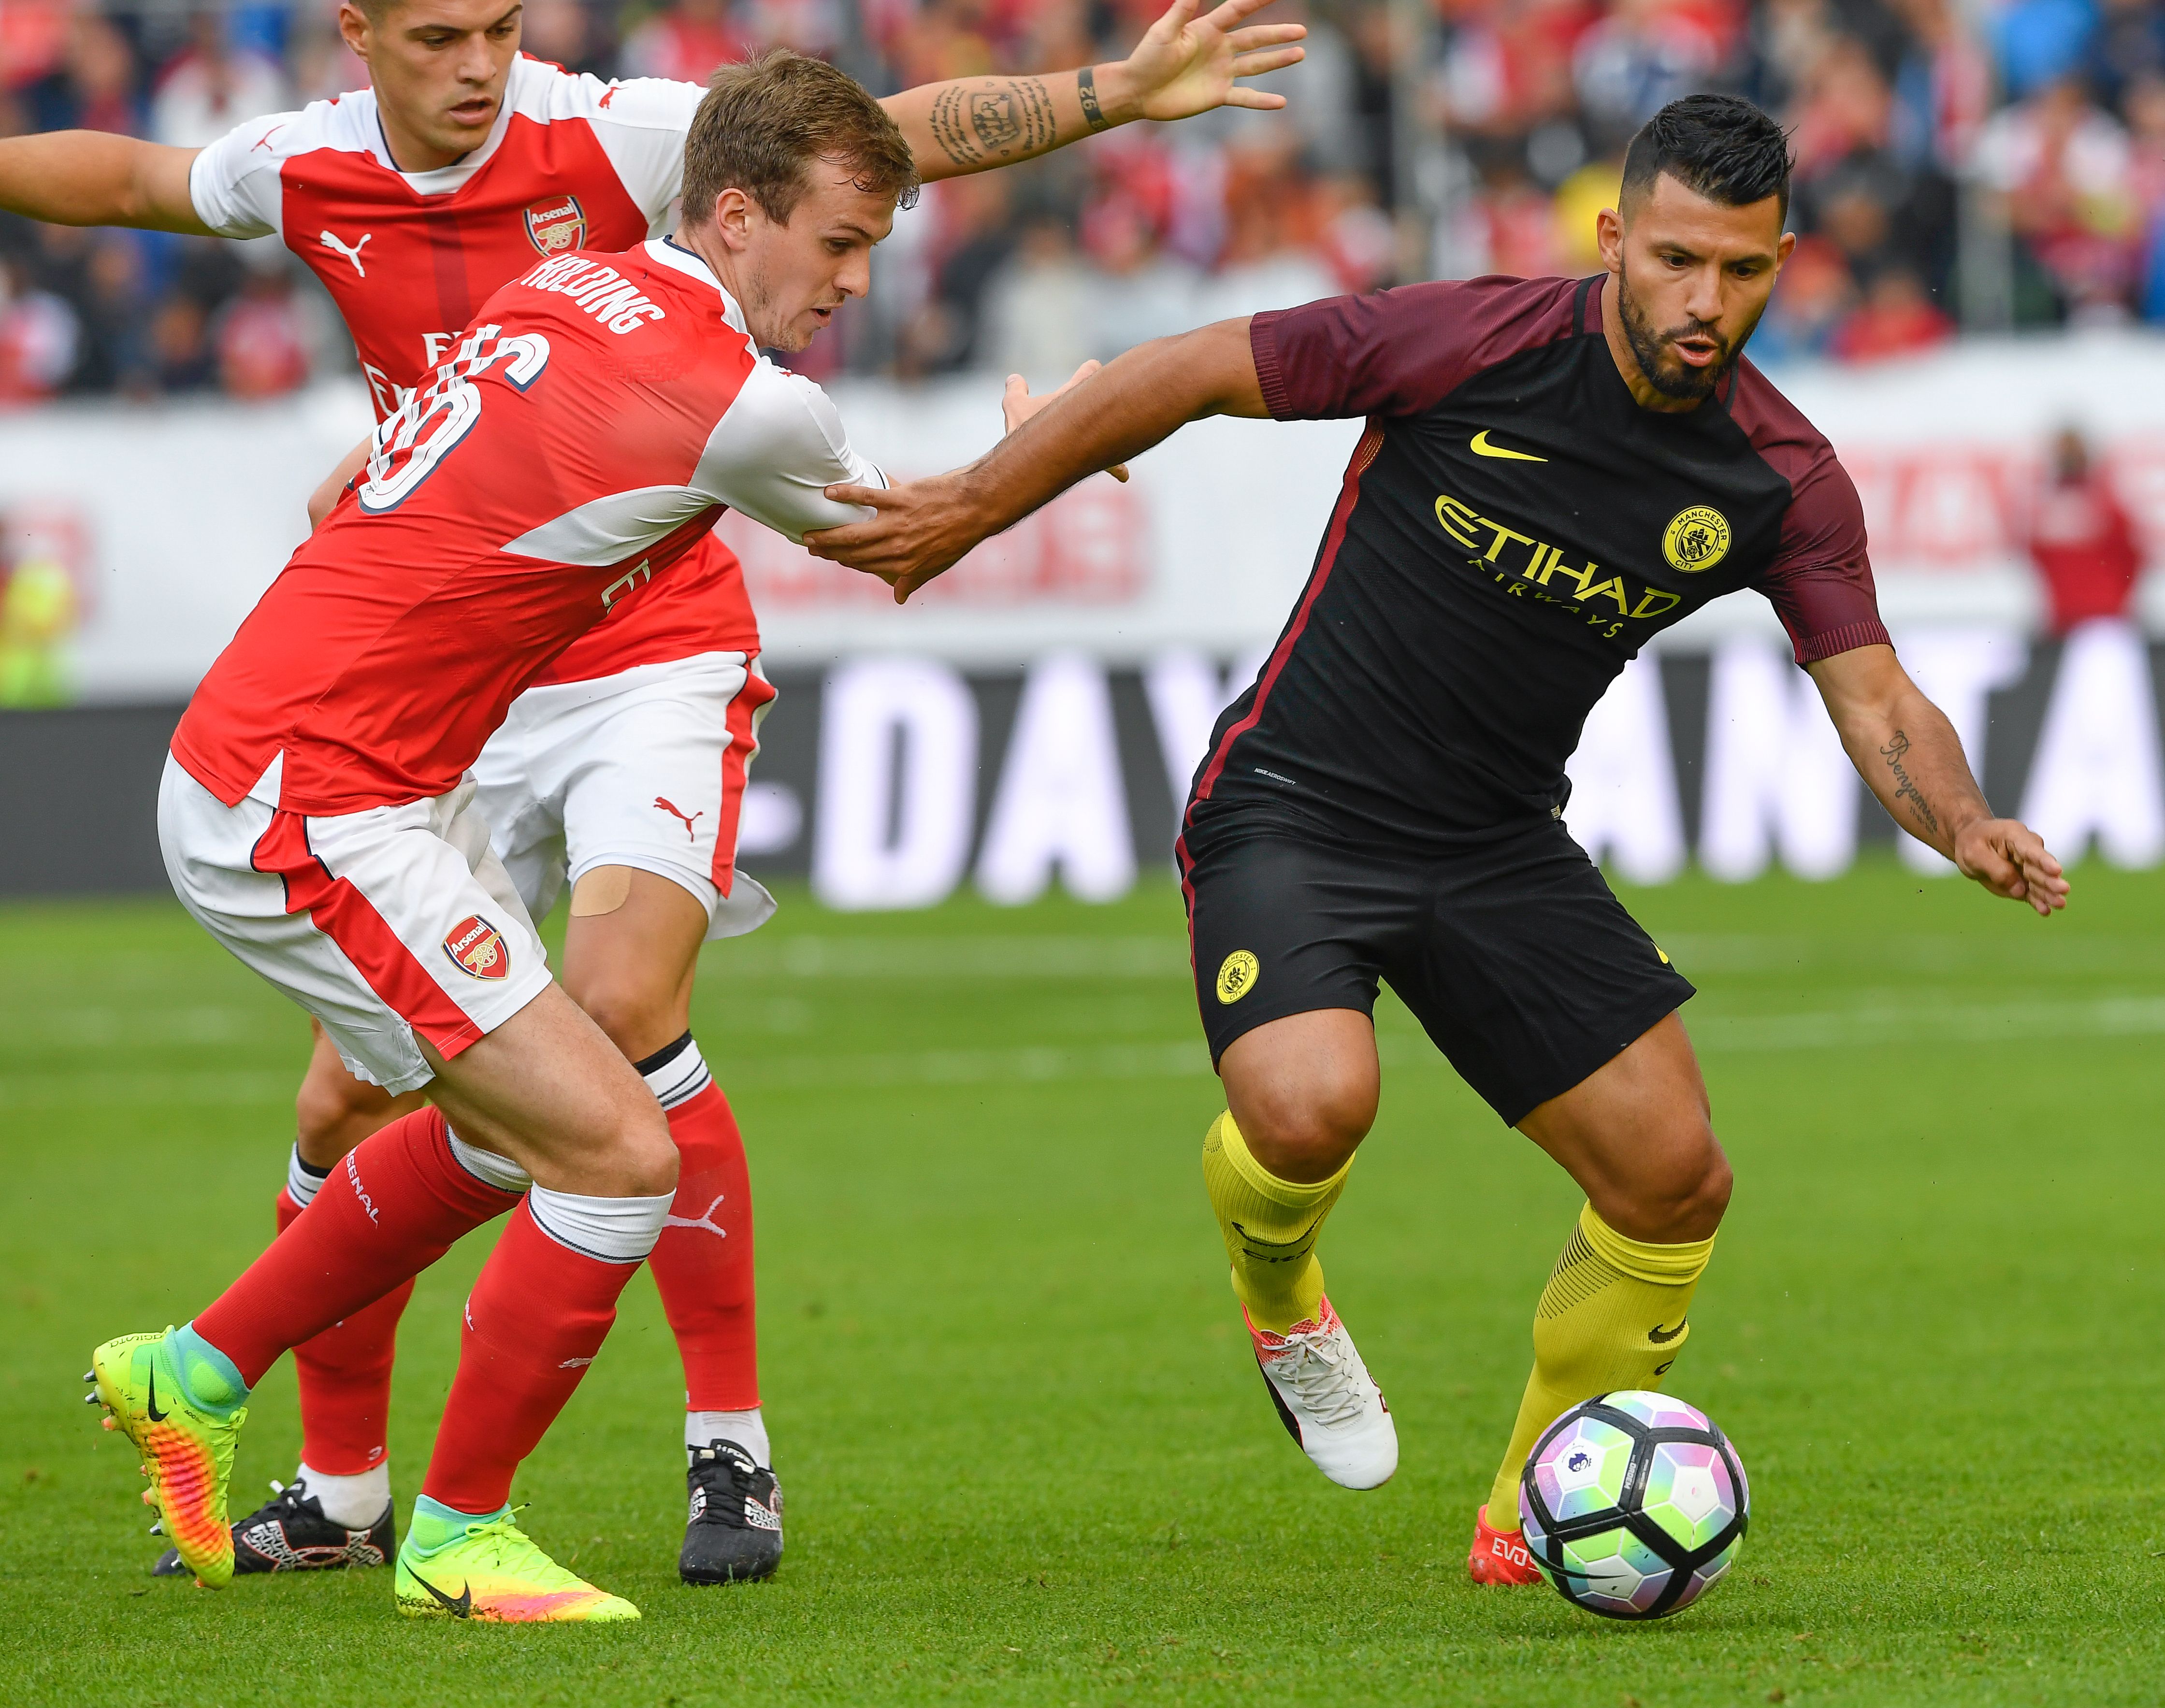 Arsenal's English defender Rob Holding (L) vies with Manchester City's Argentinian forward Sergio Aguero during the friendly football match between Arsenal and Manchester City at the Ullevi stadium in Gothenburg on August 7, 2016. / AFP / JONATHAN NACKSTRAND        (Photo credit should read JONATHAN NACKSTRAND/AFP/Getty Images)